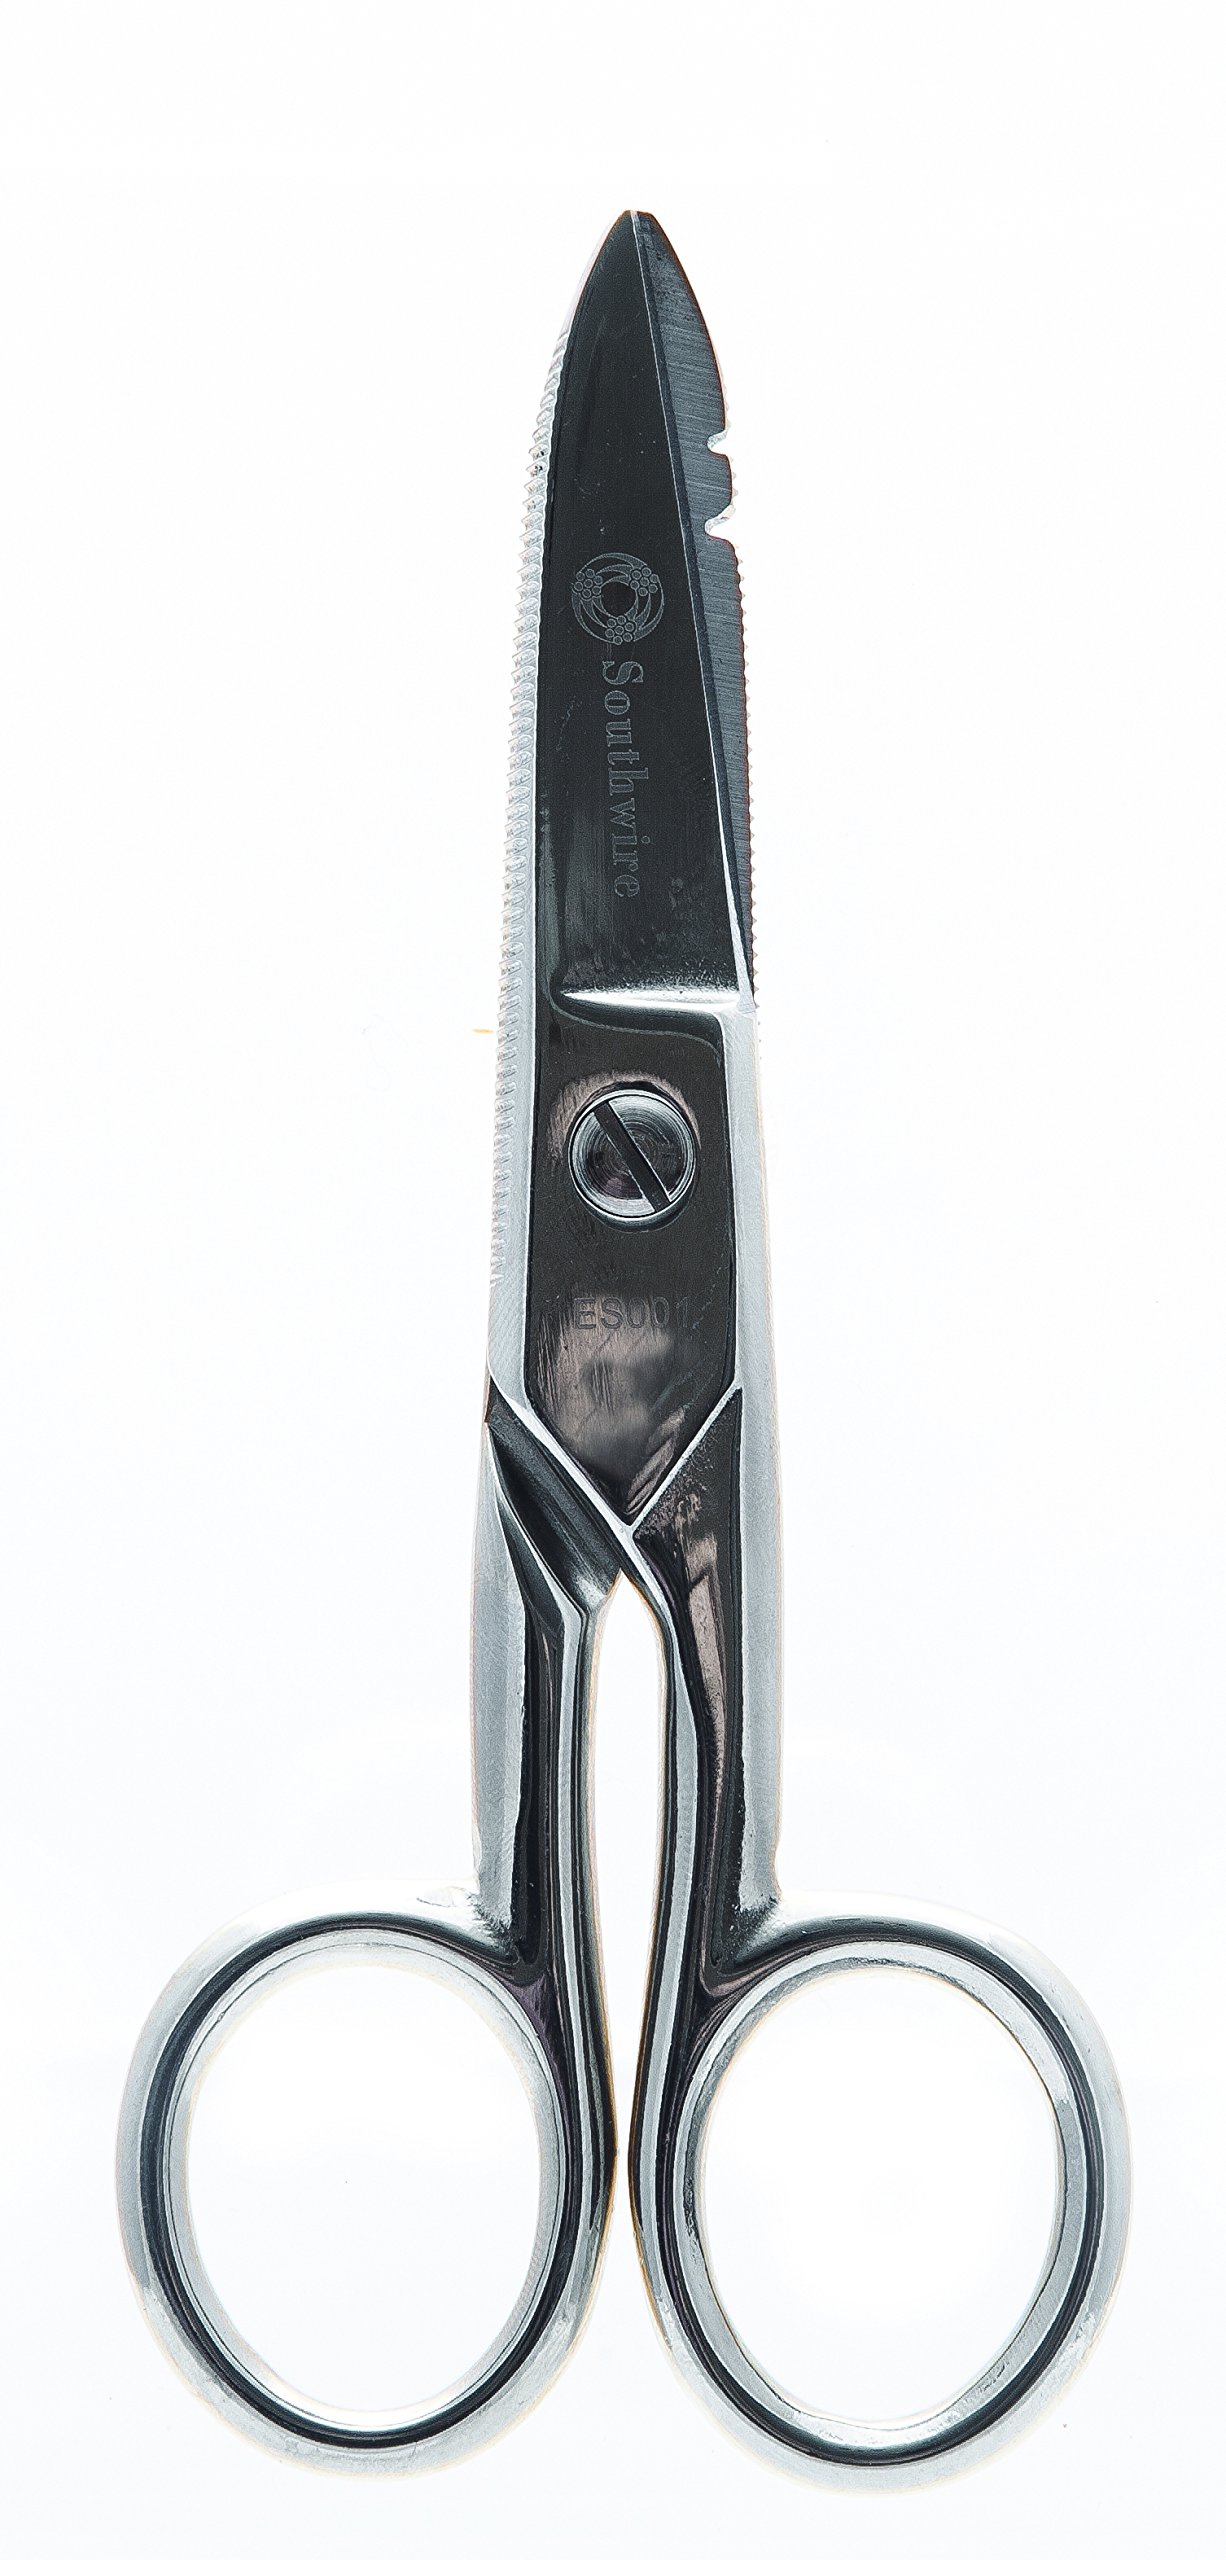 Southwire Electrician's Scissors (ES001) $7.49 + FS w/ Prime + or on orders $25+